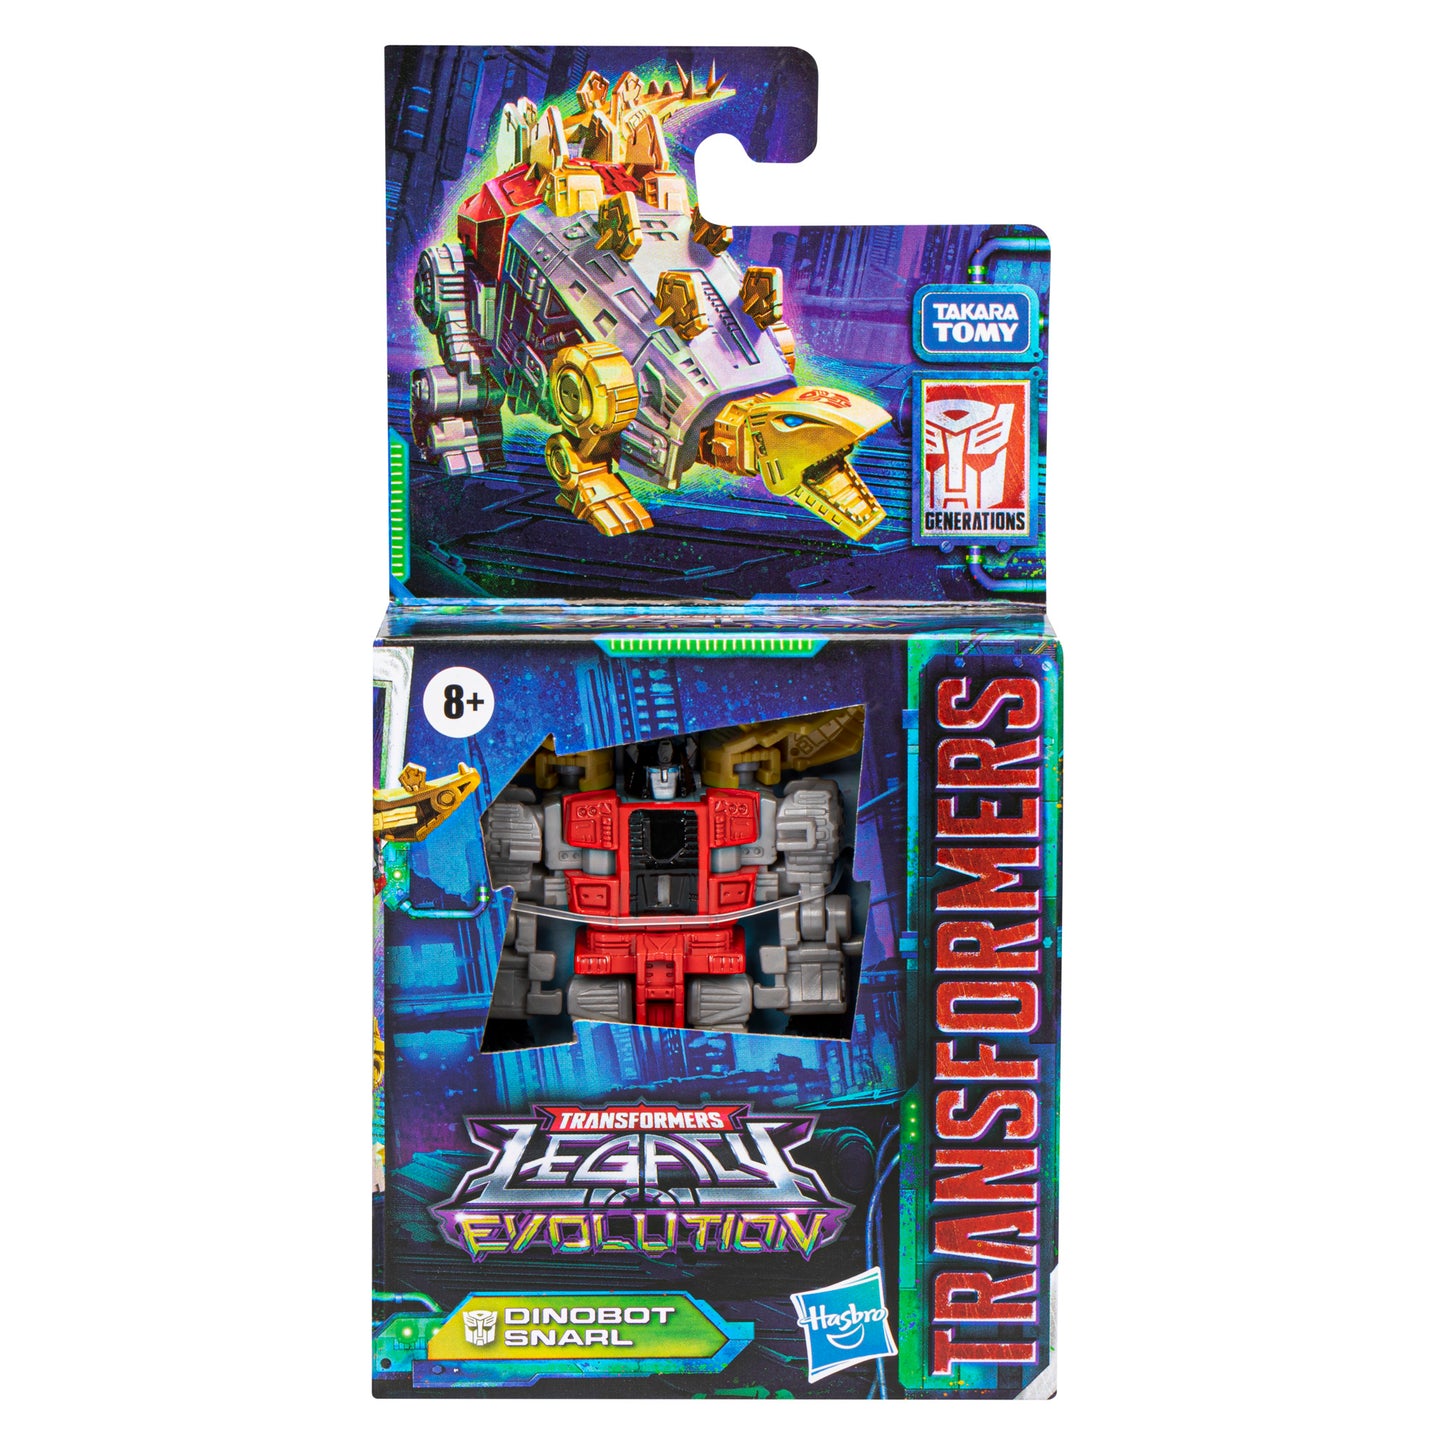 Transformers Legacy Evolution Core Class Dinobot Snarl in a package - Heretoserveyou